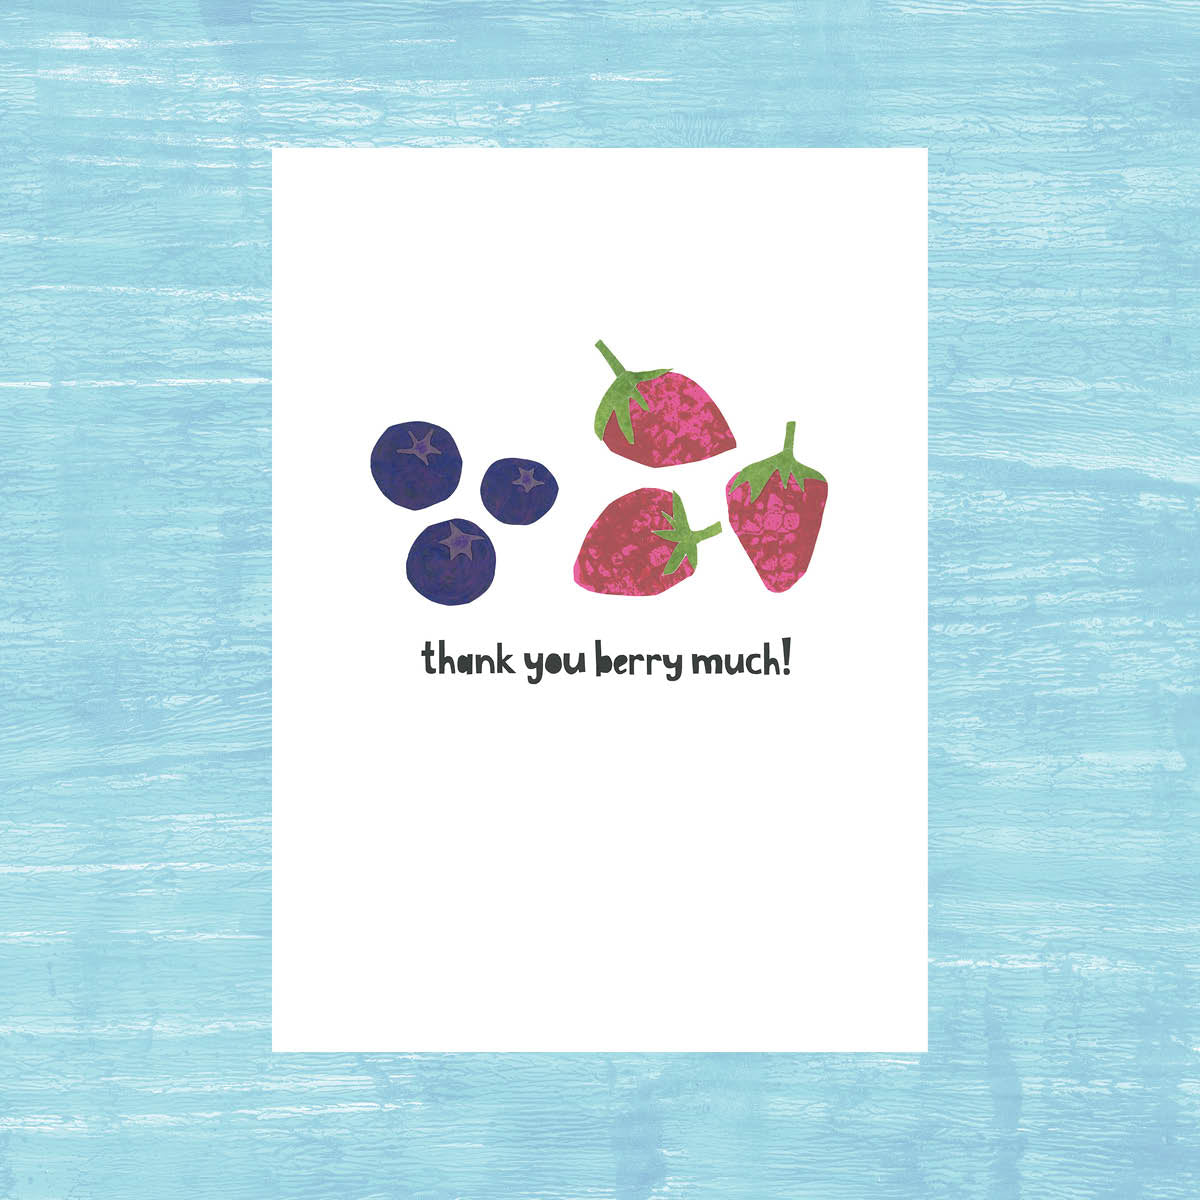 Berry Much - Greeting Card